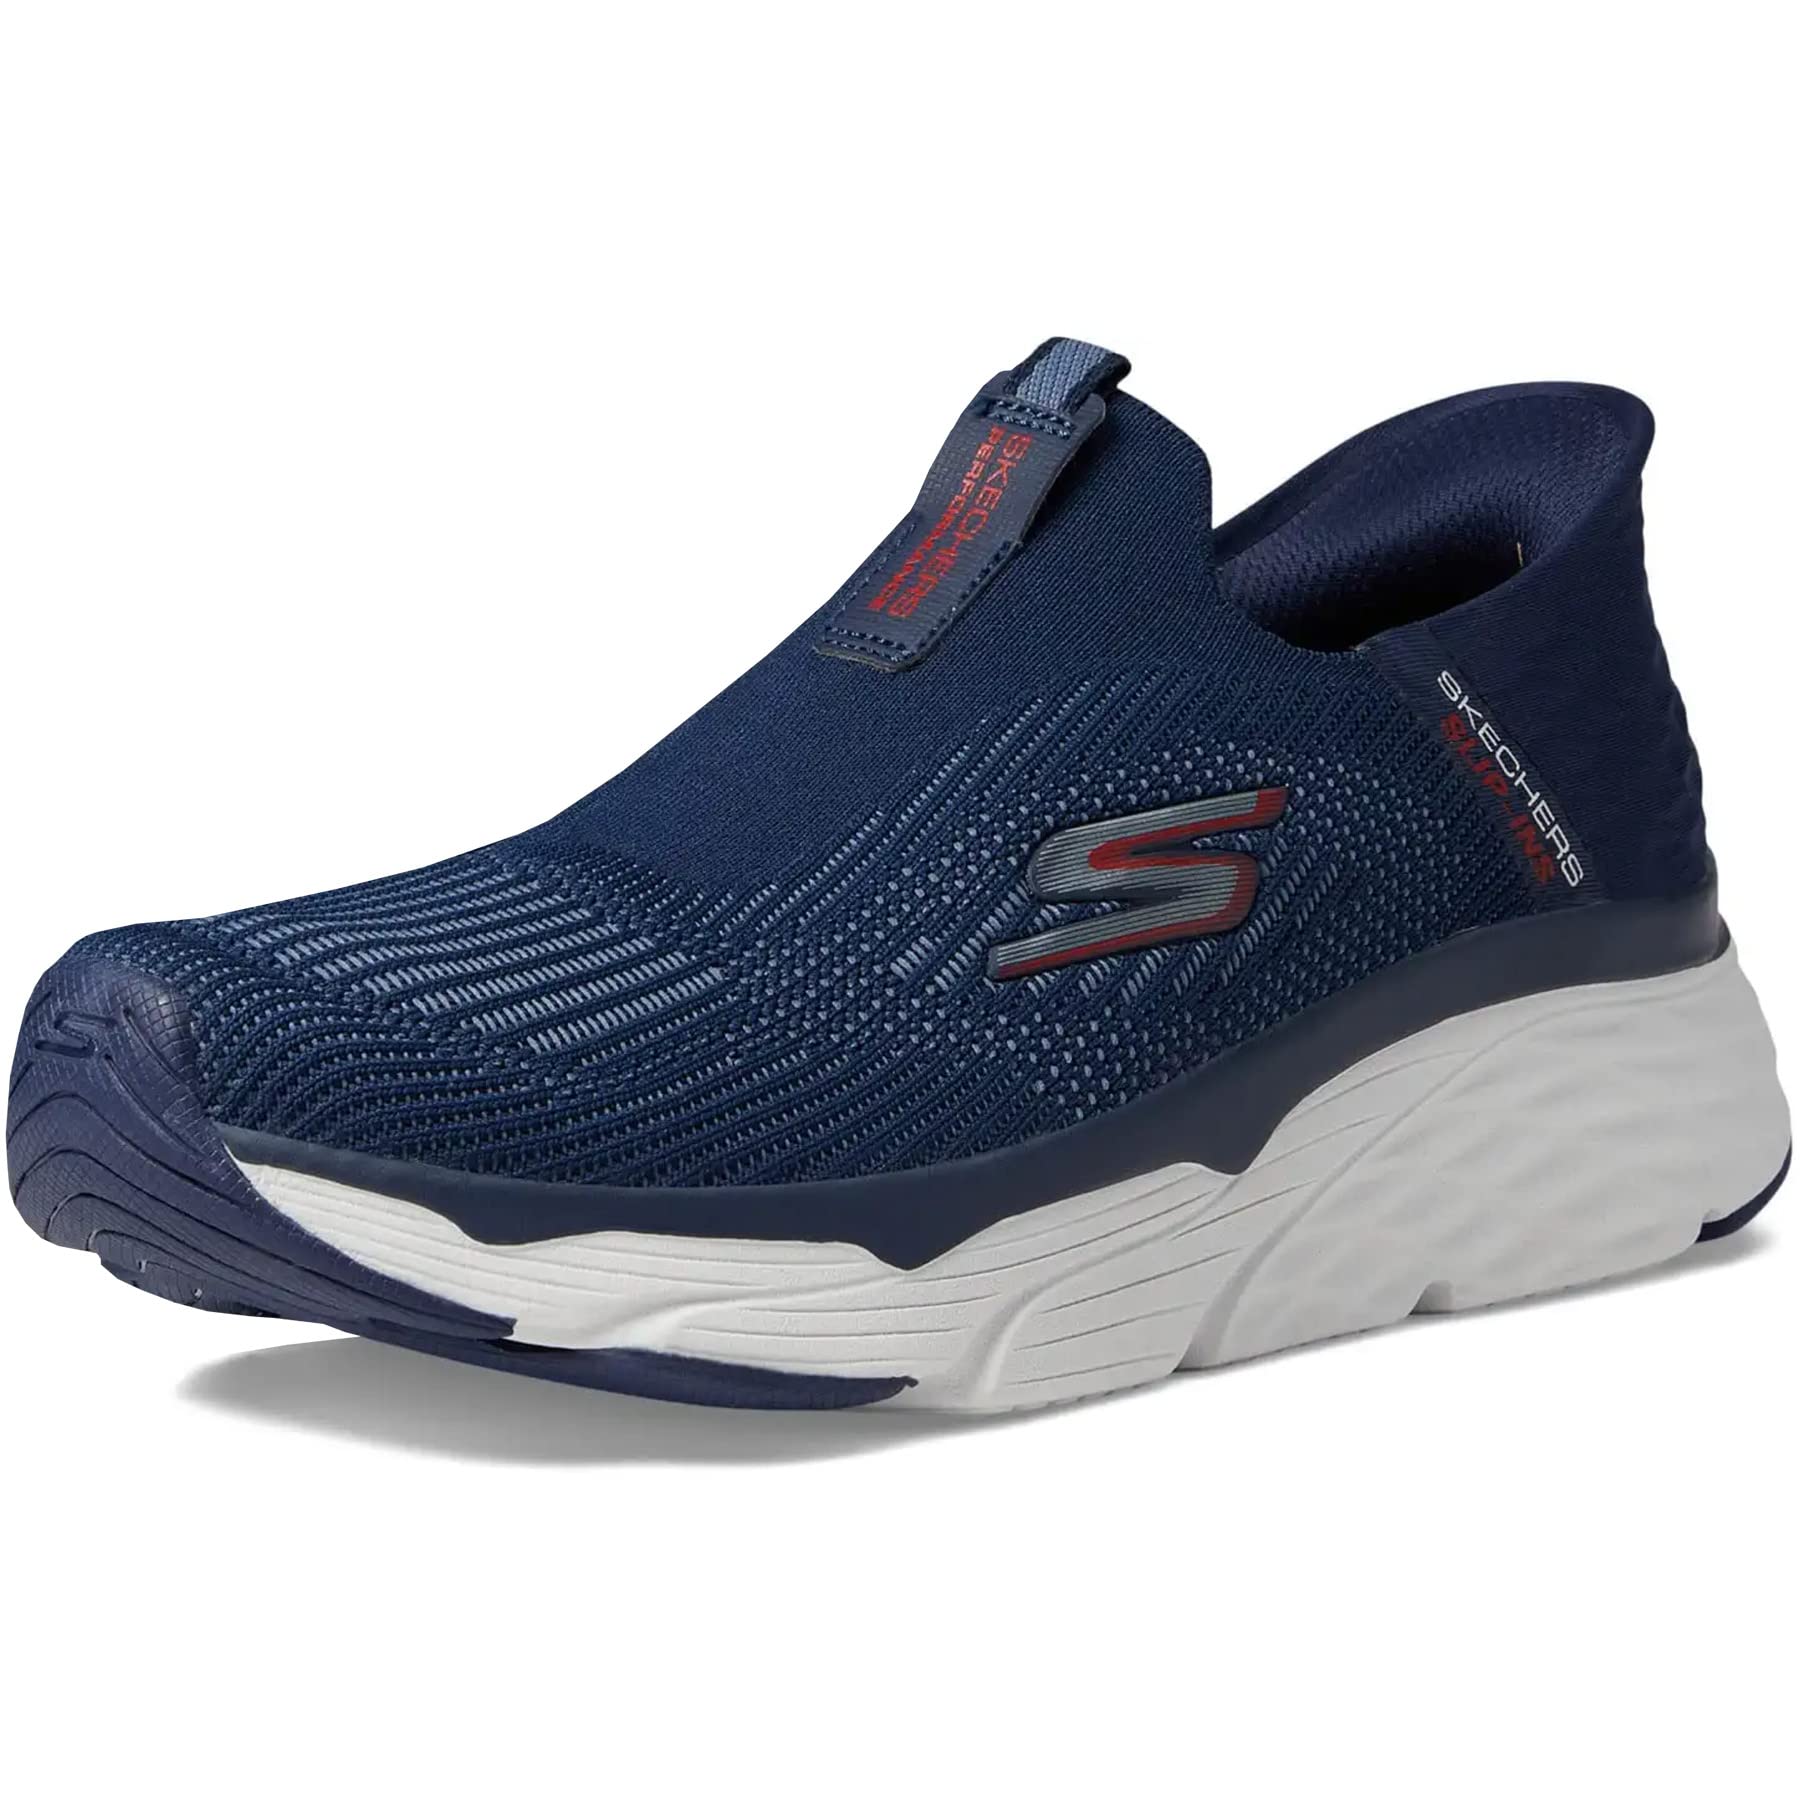  Skechers Men's Max Cushioning Slip-Ins-Athletic Workout  Running Walking Shoes with Memory Foam Sneaker, Navy, 7